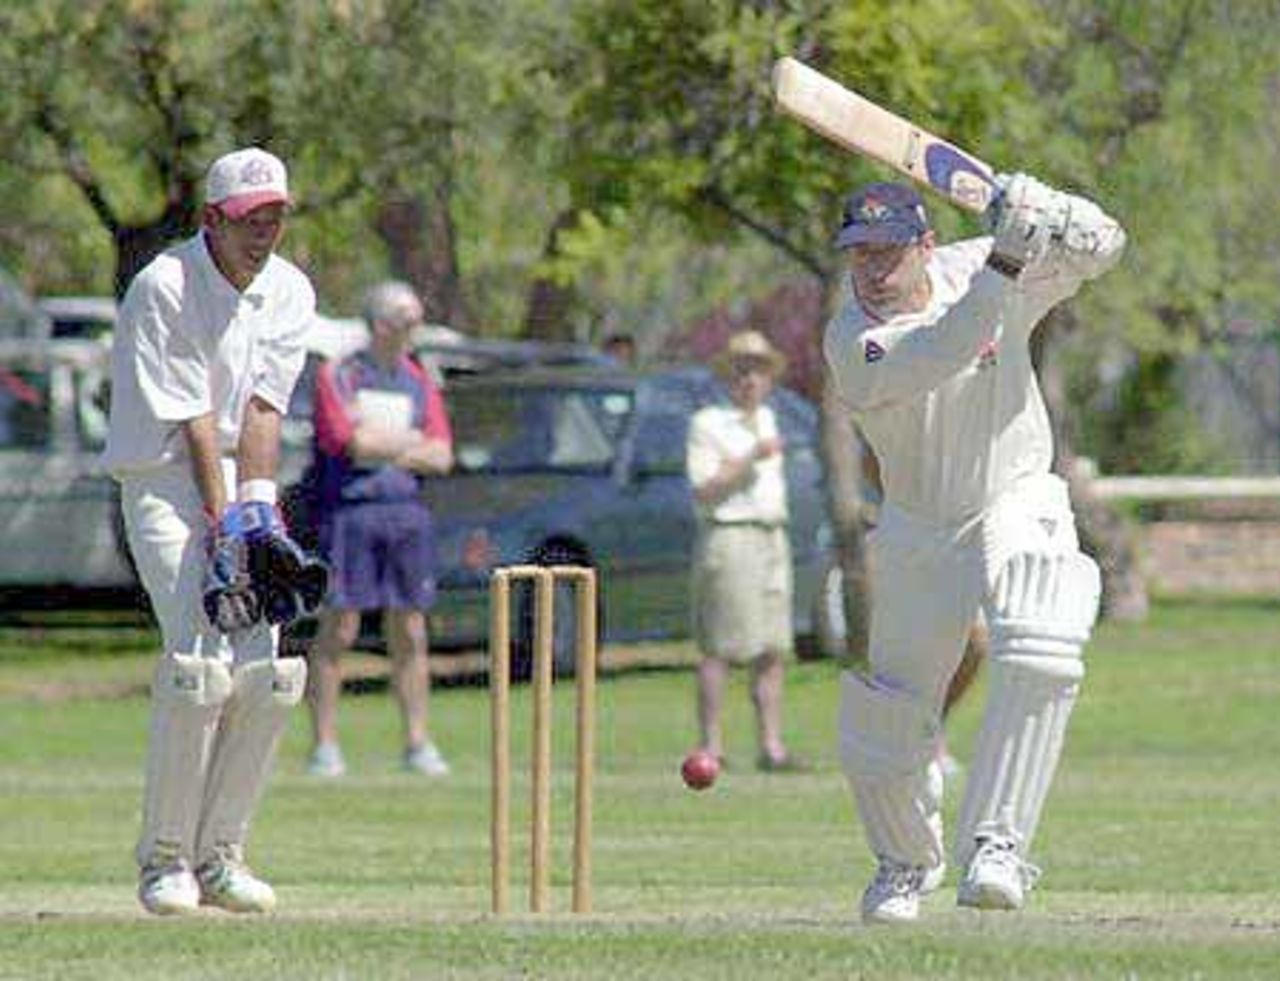 Southern Cape XI v Lancashire at Oudtshoorn Infantry School, 21 March 2001, 50 Overs match